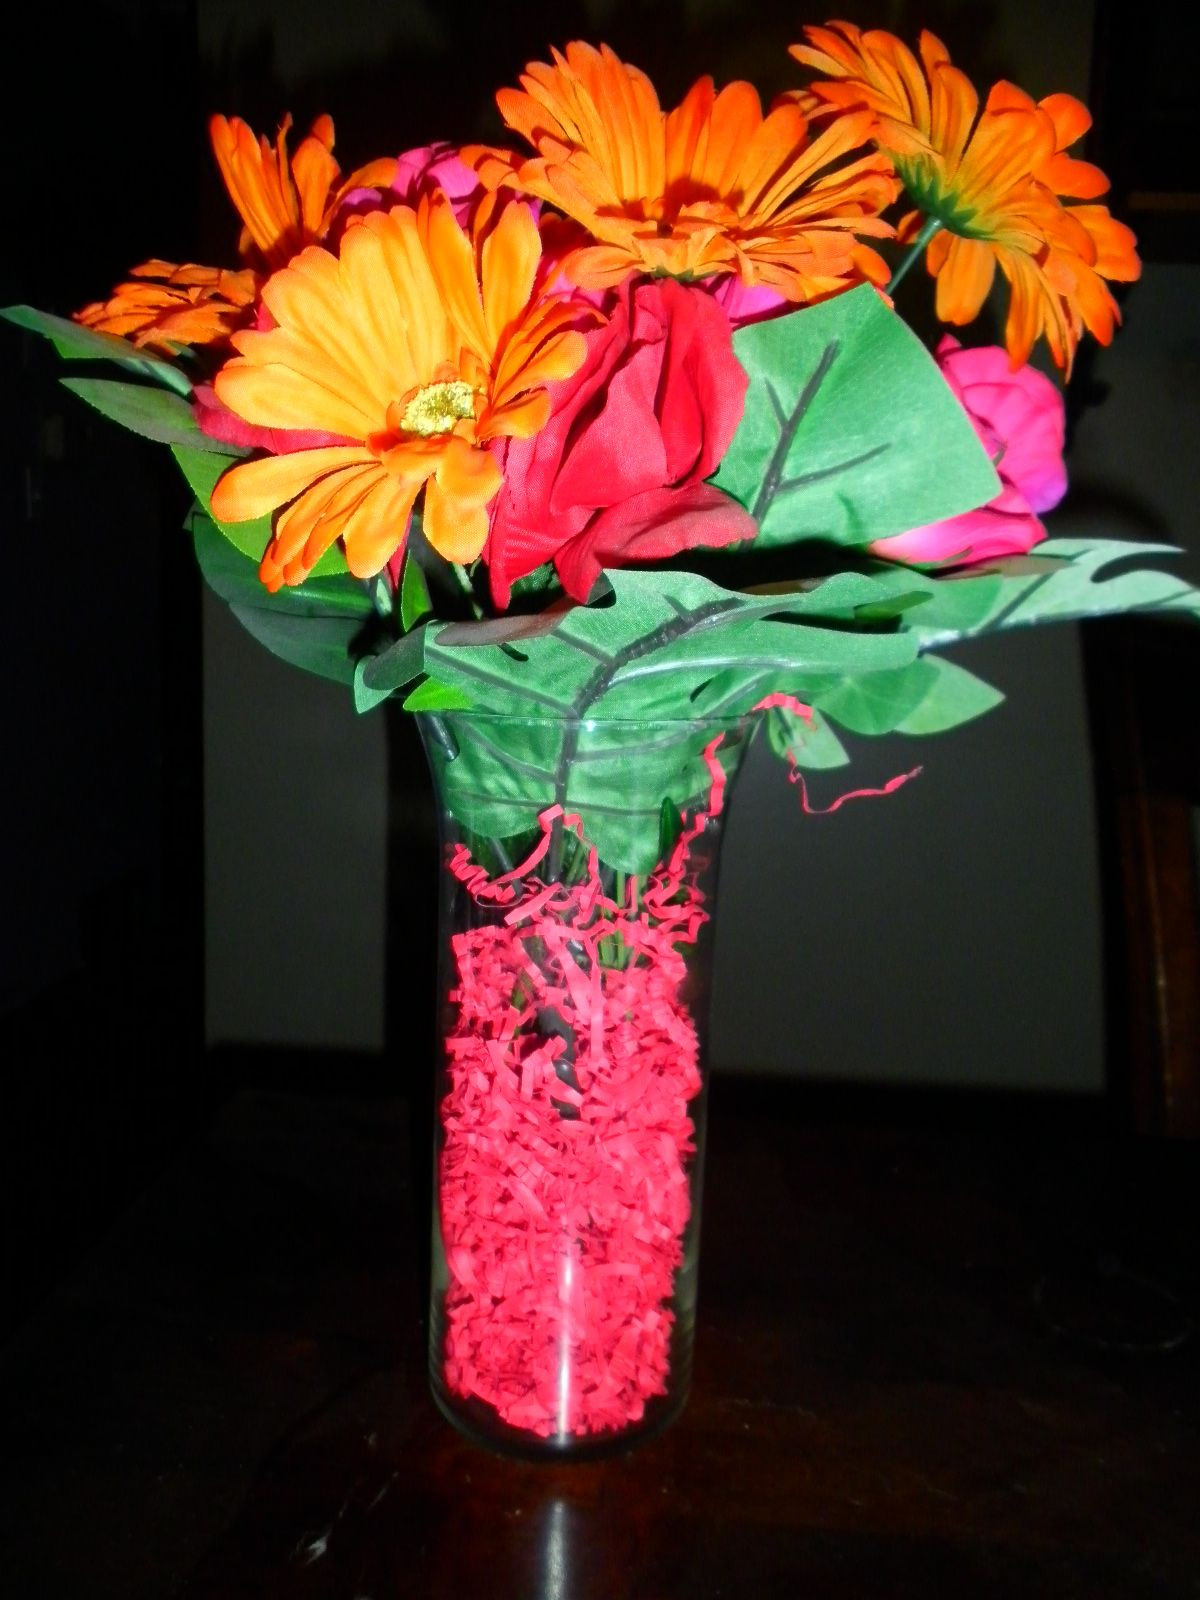 25 attractive Vase and Faux Flowers 2022 free download vase and faux flowers of flower vases flower vases pinterest inexpensive centerpieces within fun ways to make inexpensive centerpieces fake flowers and leaves with basket stuffing from a dol